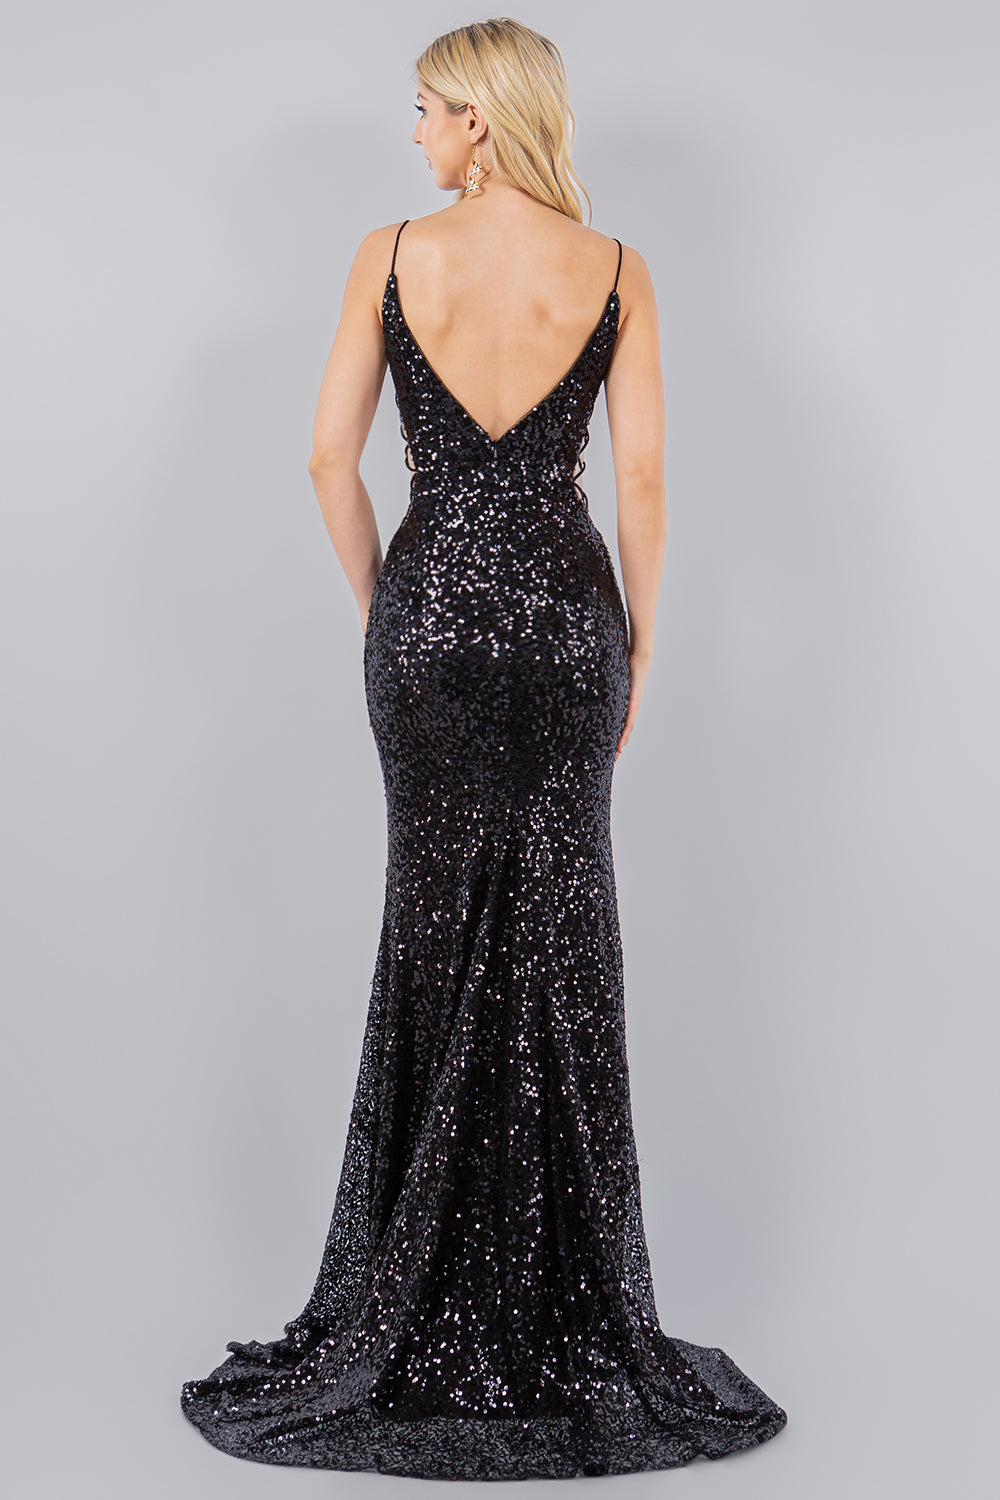 Fitted Sequin Sleeveless Slit Gown by Cinderella Couture 8078J